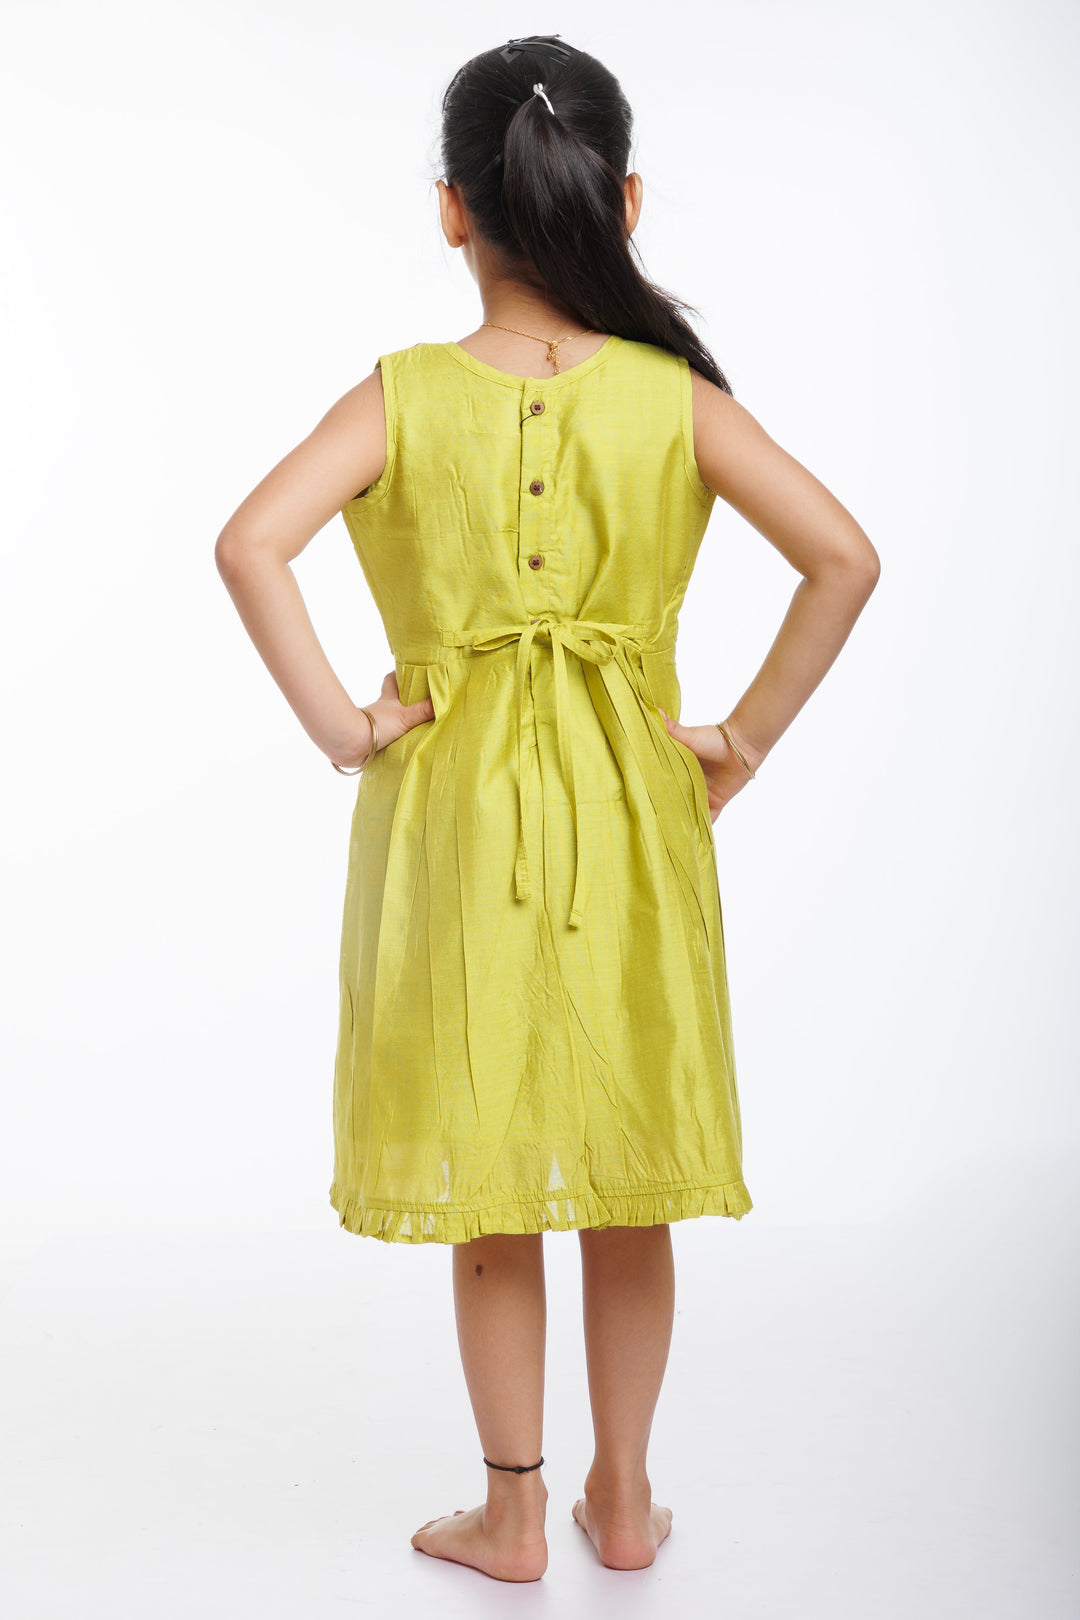 The Nesavu Girls Cotton Frock Girls Vibrant Green Cotton Frock with Floral Embroidery - Casual Elegance Redefined Nesavu Green Embroidered Cotton Dress for Girls | Perfect for Summer Fun | The Nesavu